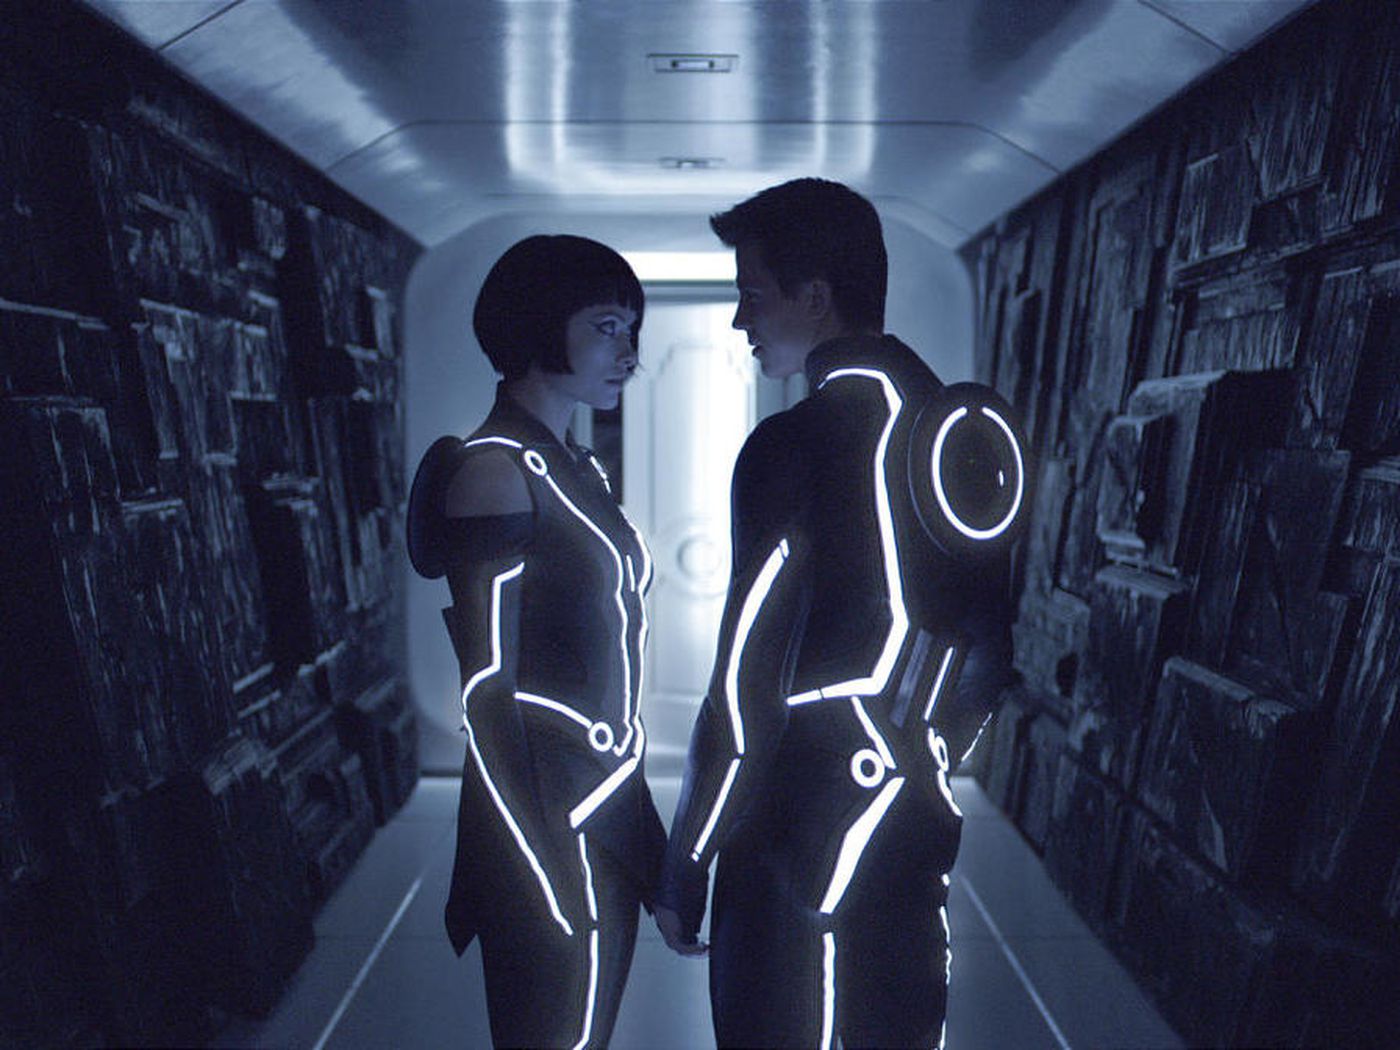 Tron: Legacy' is a stylish update